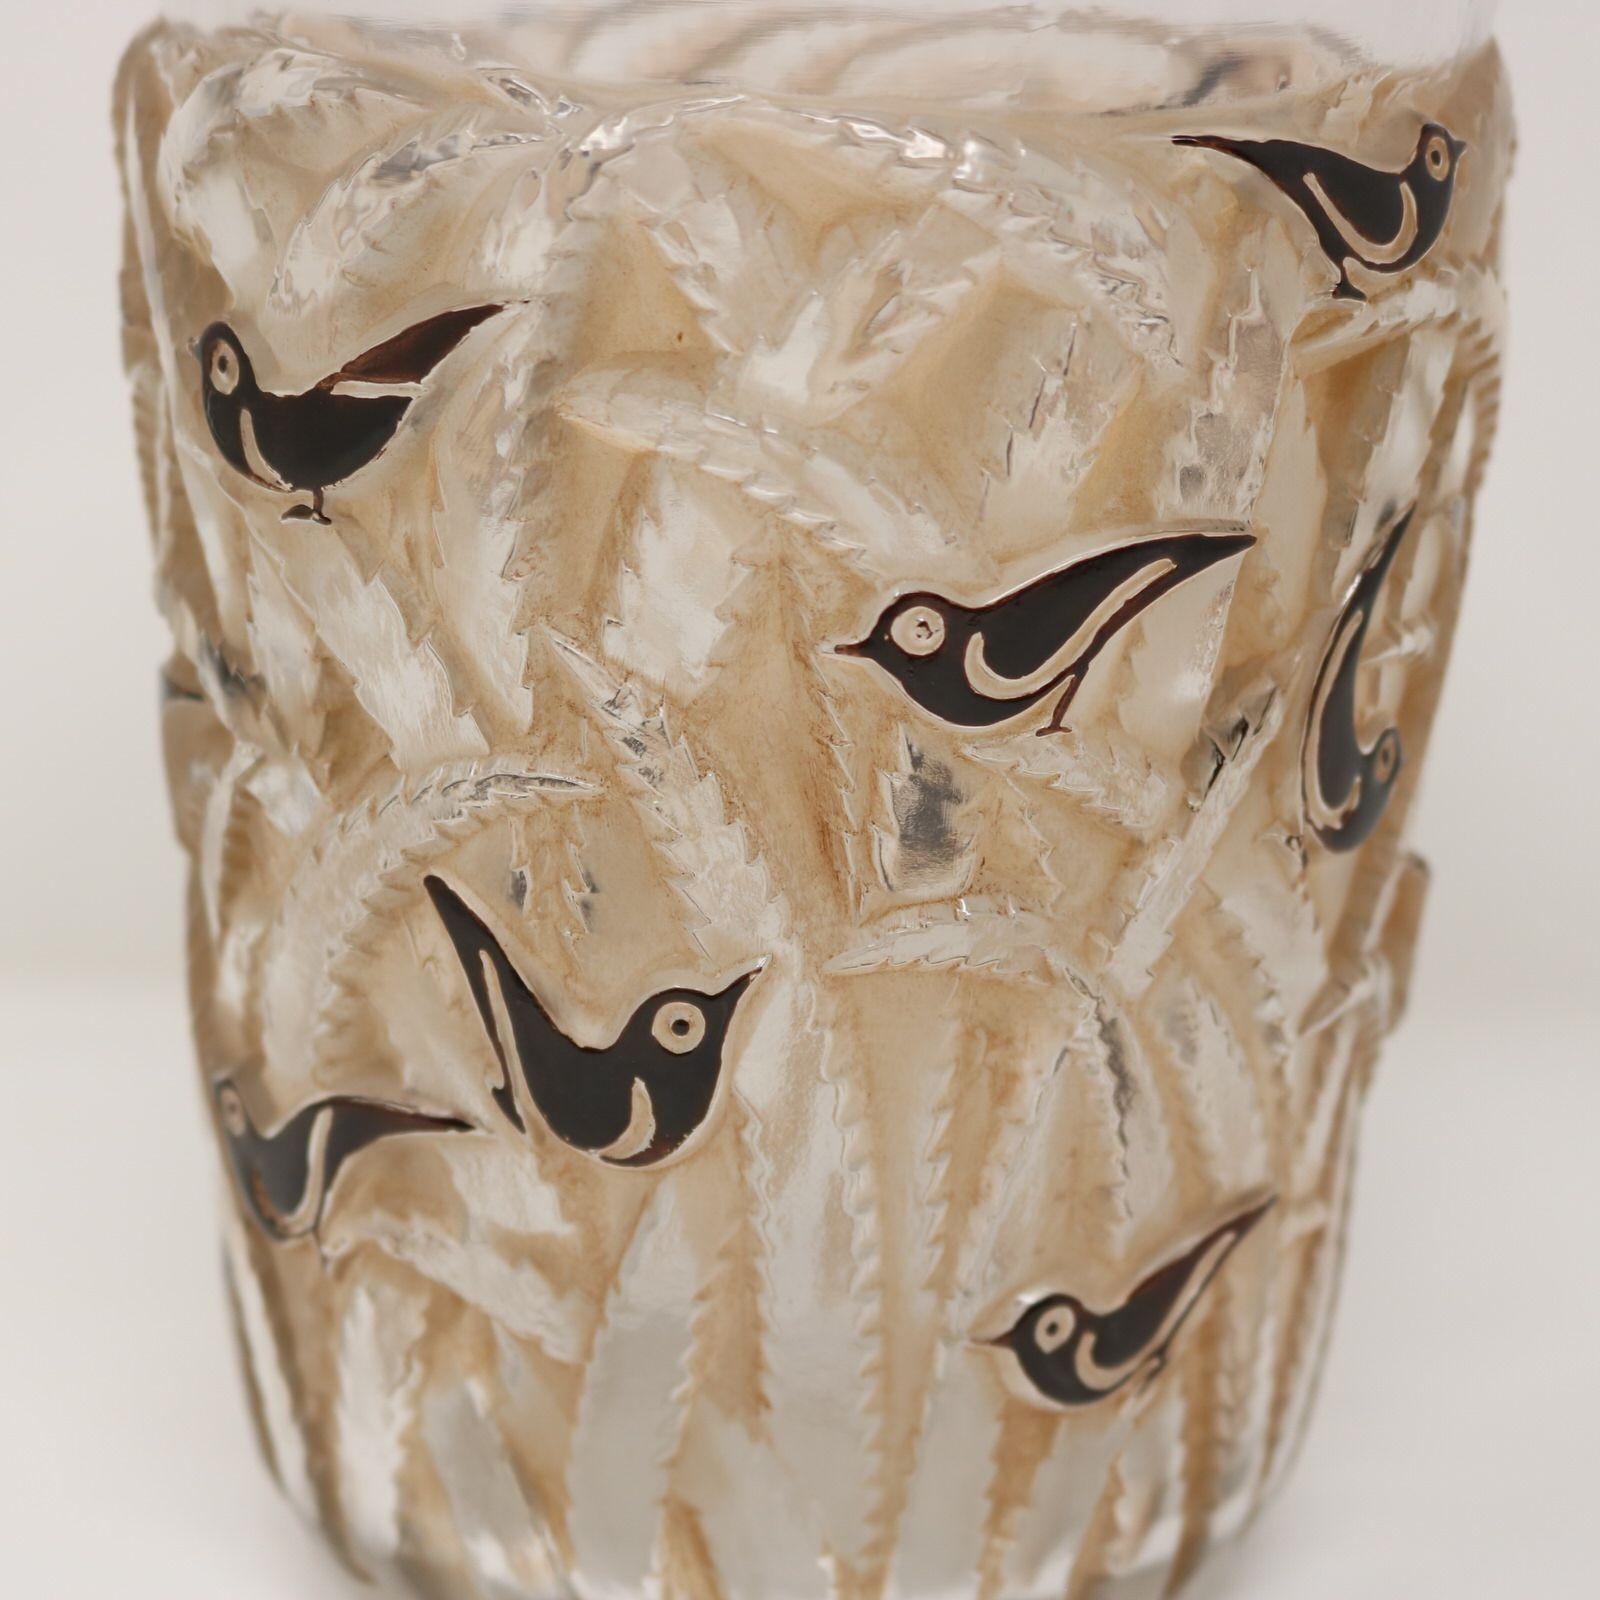 Rene Lalique Glass Borneo Vase In Excellent Condition For Sale In Chelmsford, Essex